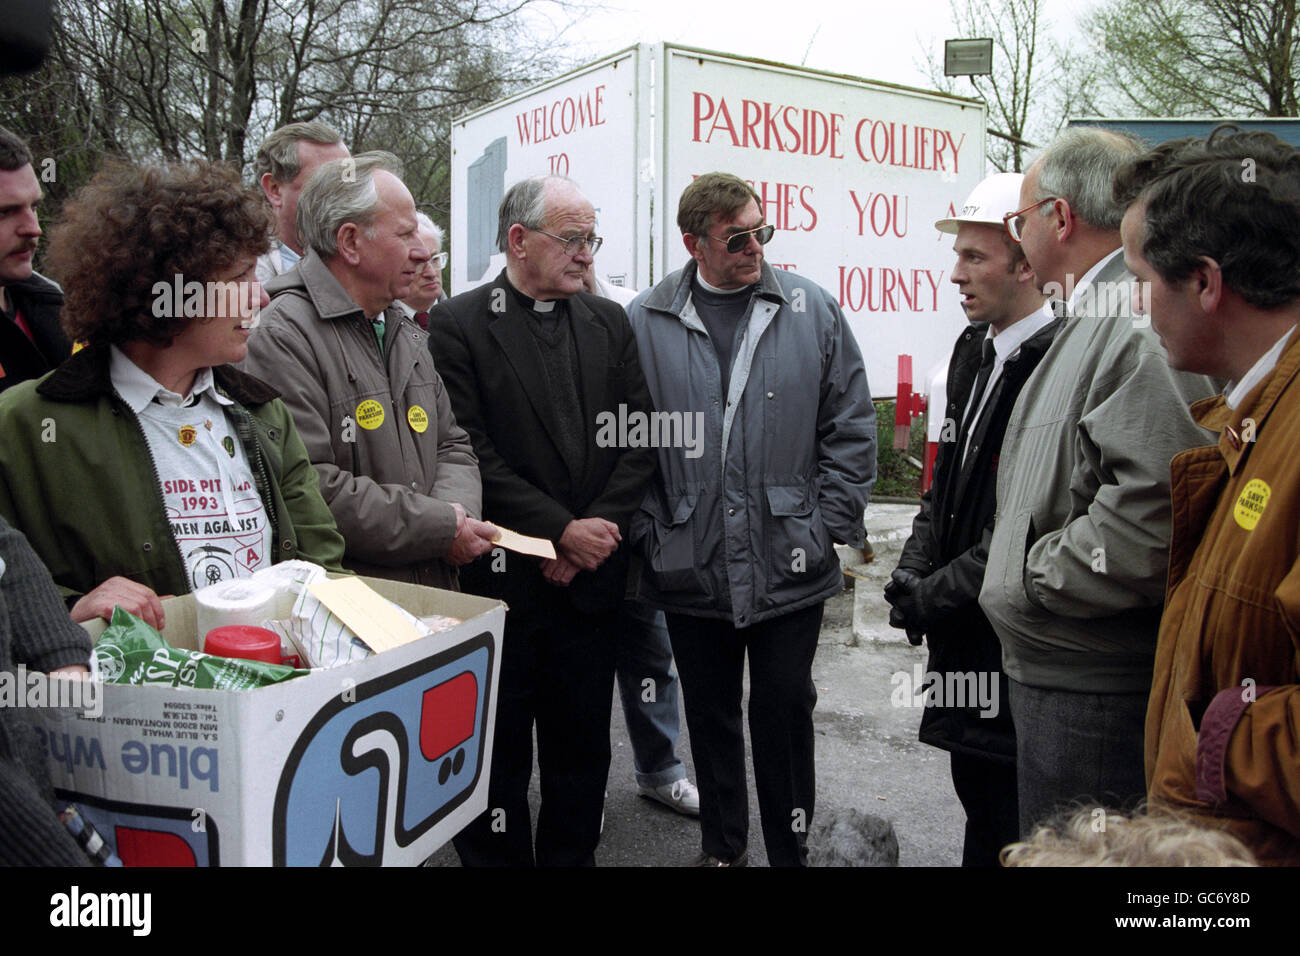 LANCASHIRE WOMEN AGAINST PIT CLOSURES TRIED TO DELIVER FOOD TO FOUR OF THEIR MEMBERS HOLDING A SIT-IN UNDERGROUND AT PARKSIDE PIT, NEWTON LE WILLOWS ACCOMPANIED BY CLERGY, MP'S AND UNION MEMBERS. Stock Photo